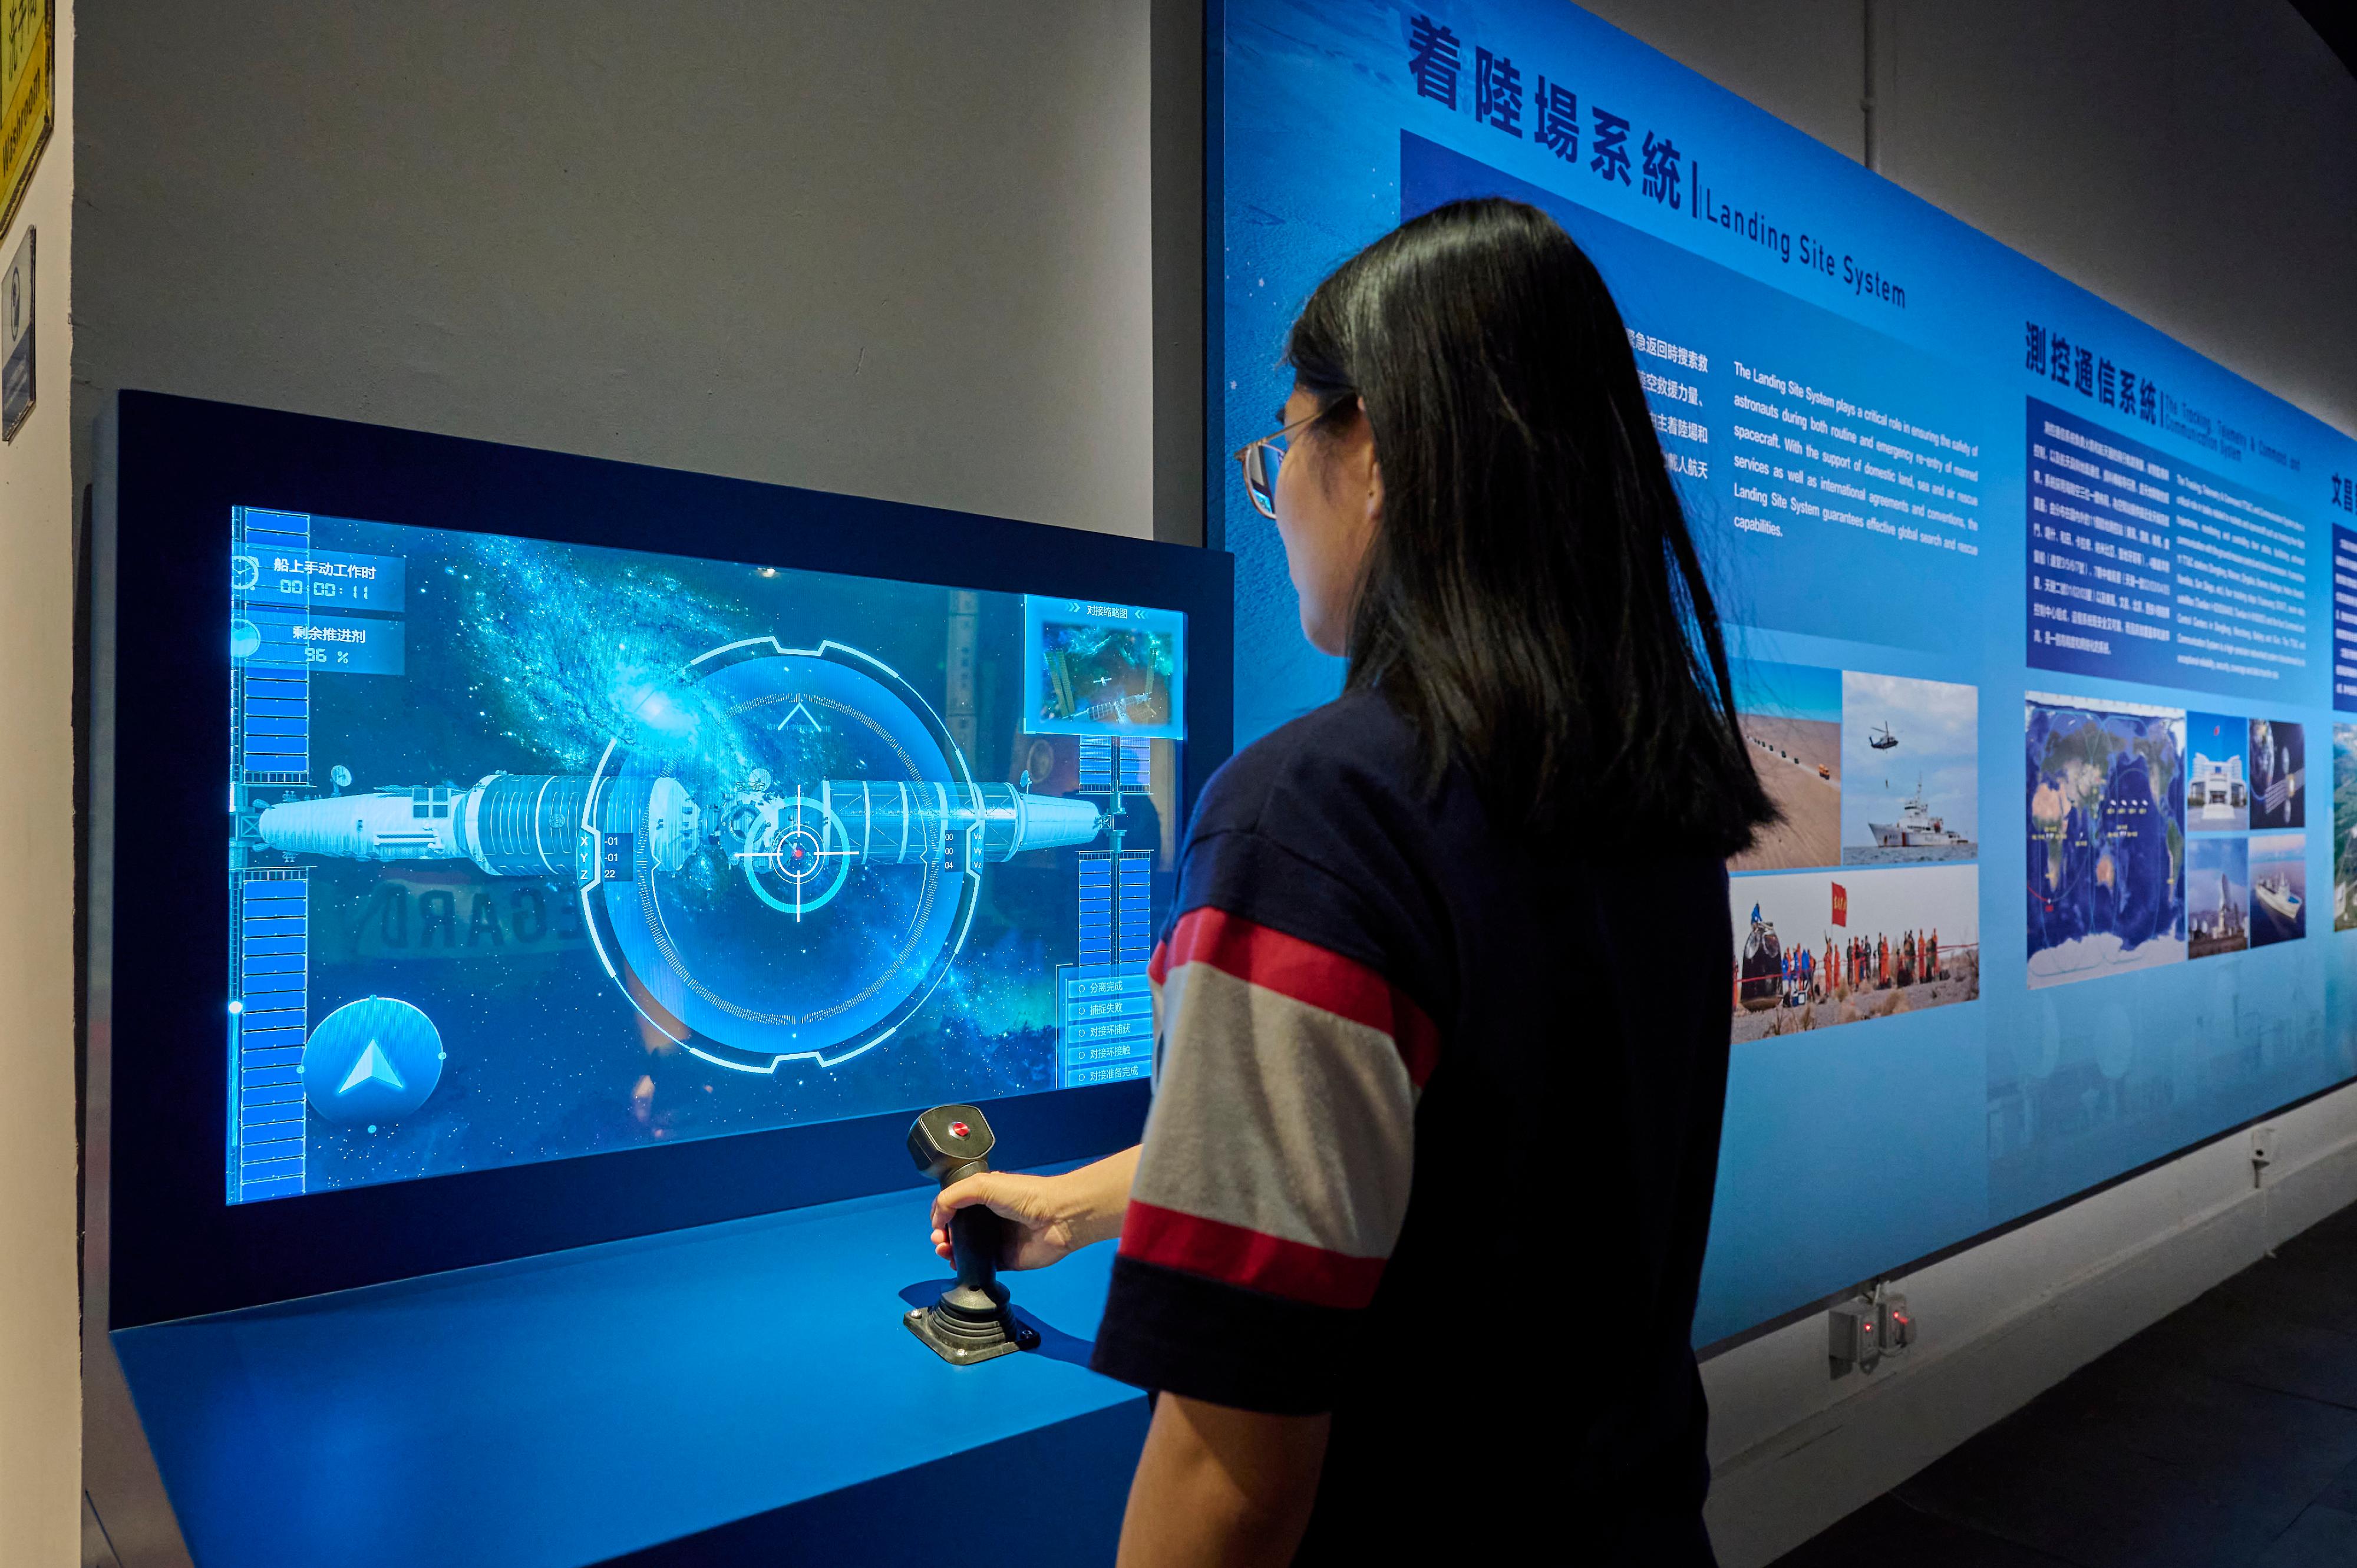 The China Manned Space Exhibition will be held from tomorrow (December 1) to February 18 next year at the Hong Kong Science Museum and the Hong Kong Museum of History. Photo shows an interactive exhibit, "Space Station Rendezvous and Docking". Visitors can simulate astronauts controlling a Shenzhou manned spacecraft to rendezvous and dock with the space station.